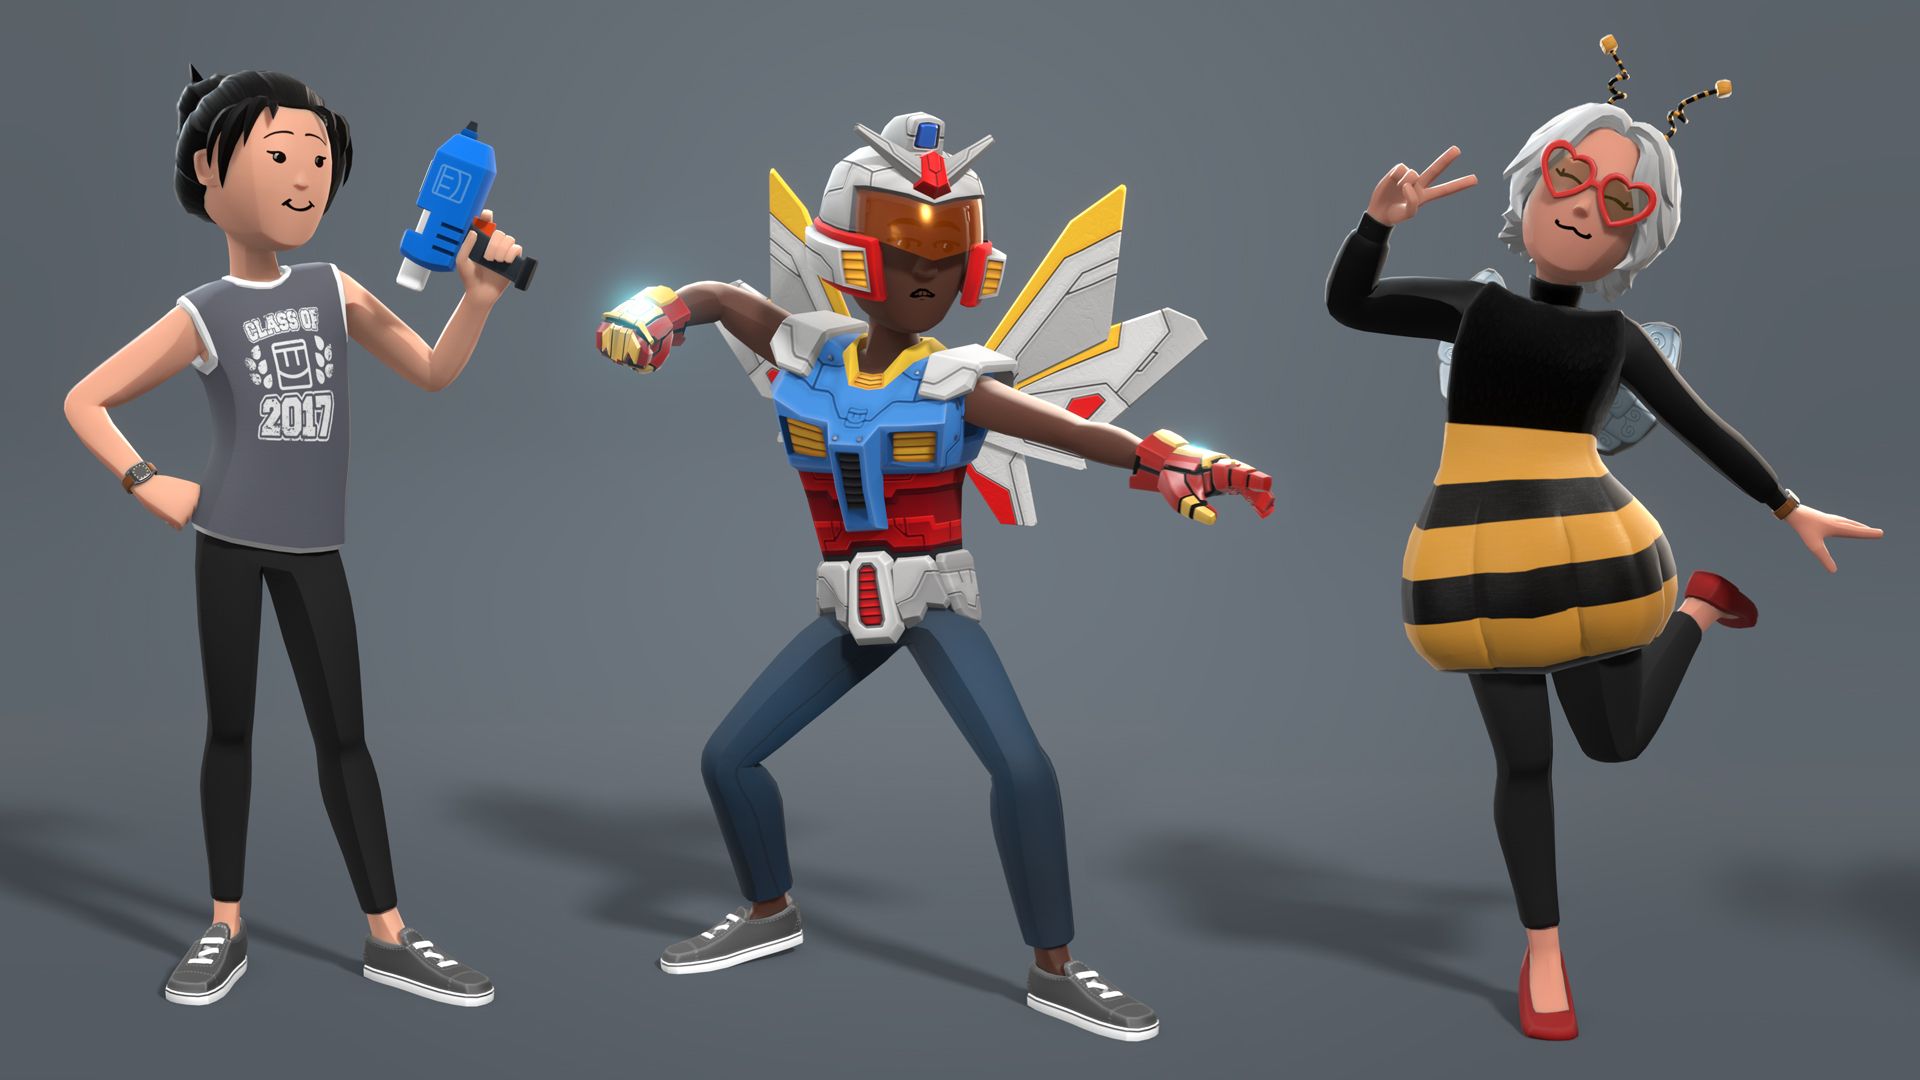 'Rec Room' to Roll Out Full-body Avatars in March